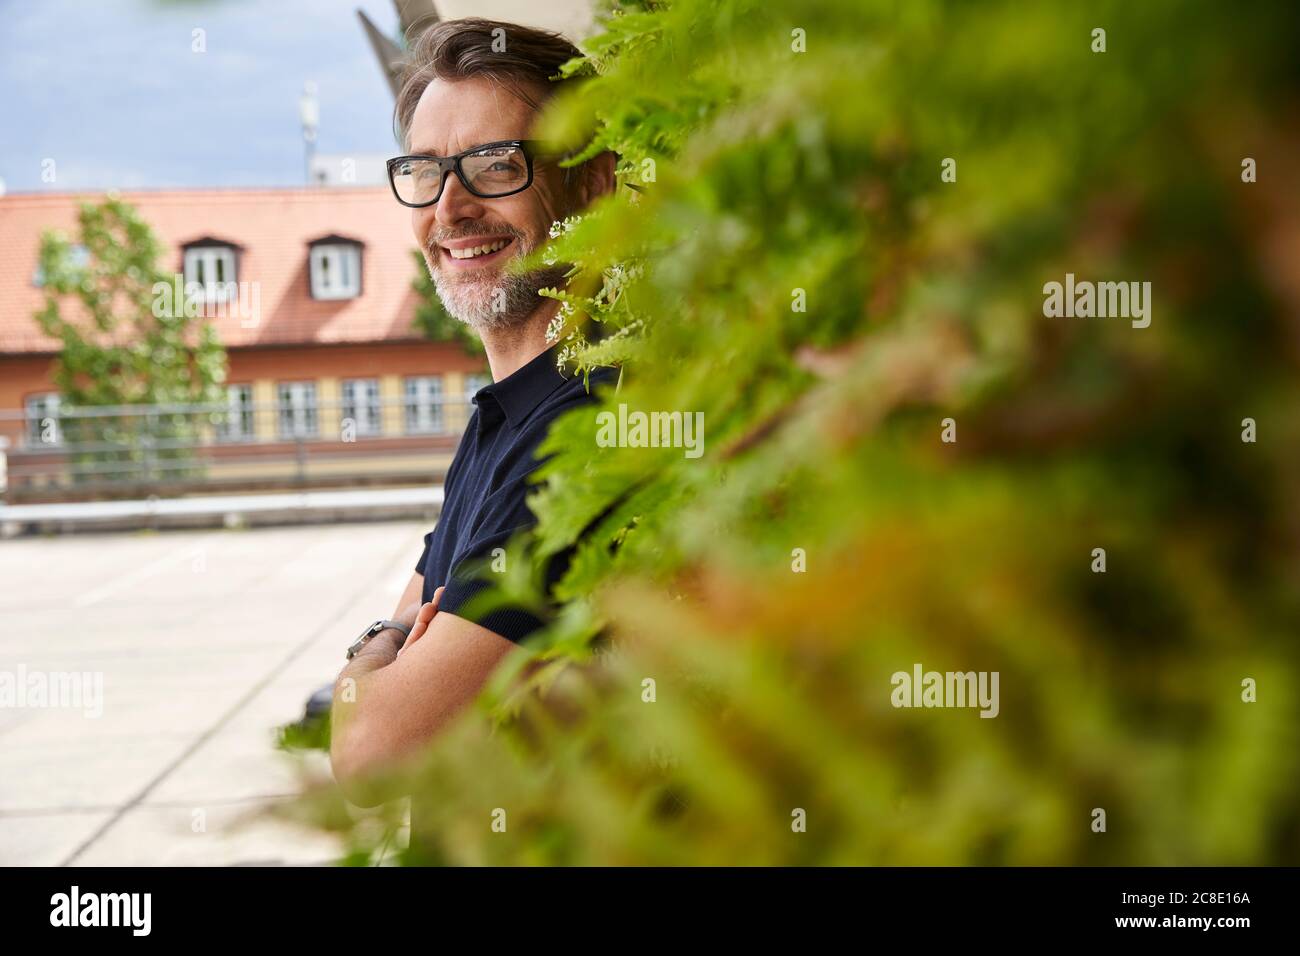 Thoughtful mature man smiling while standing by plants on footpath at yard Stock Photo